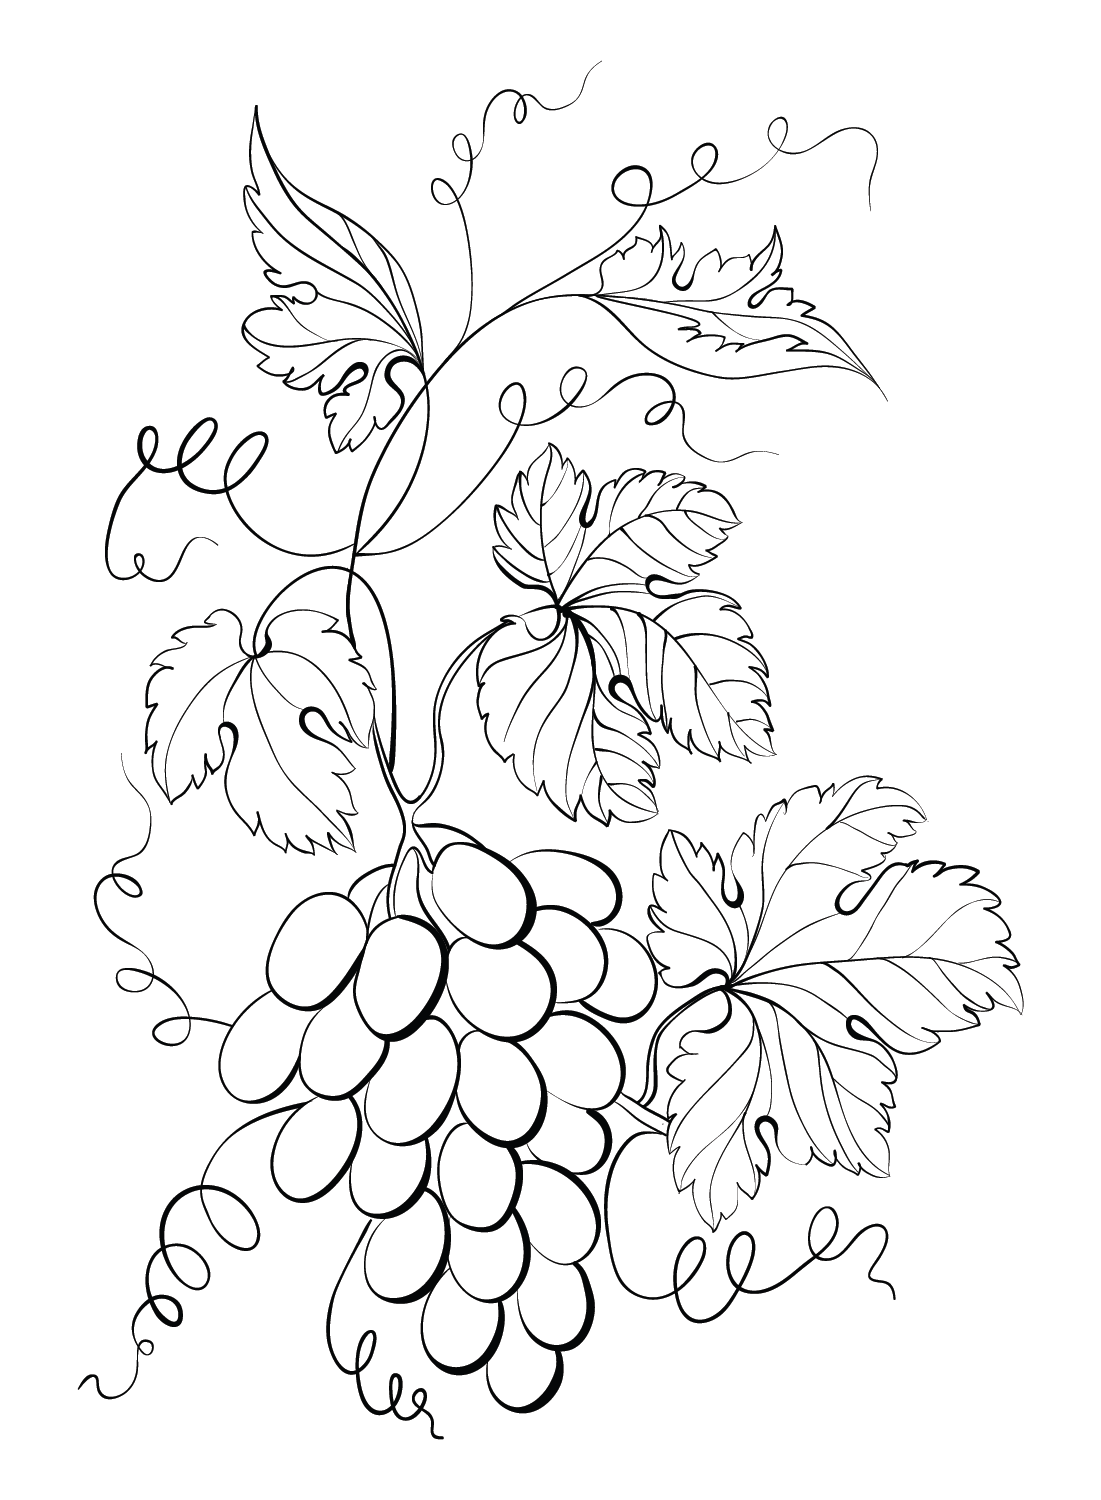 Grapes Printable Coloring Page - Free Printable Coloring Pages